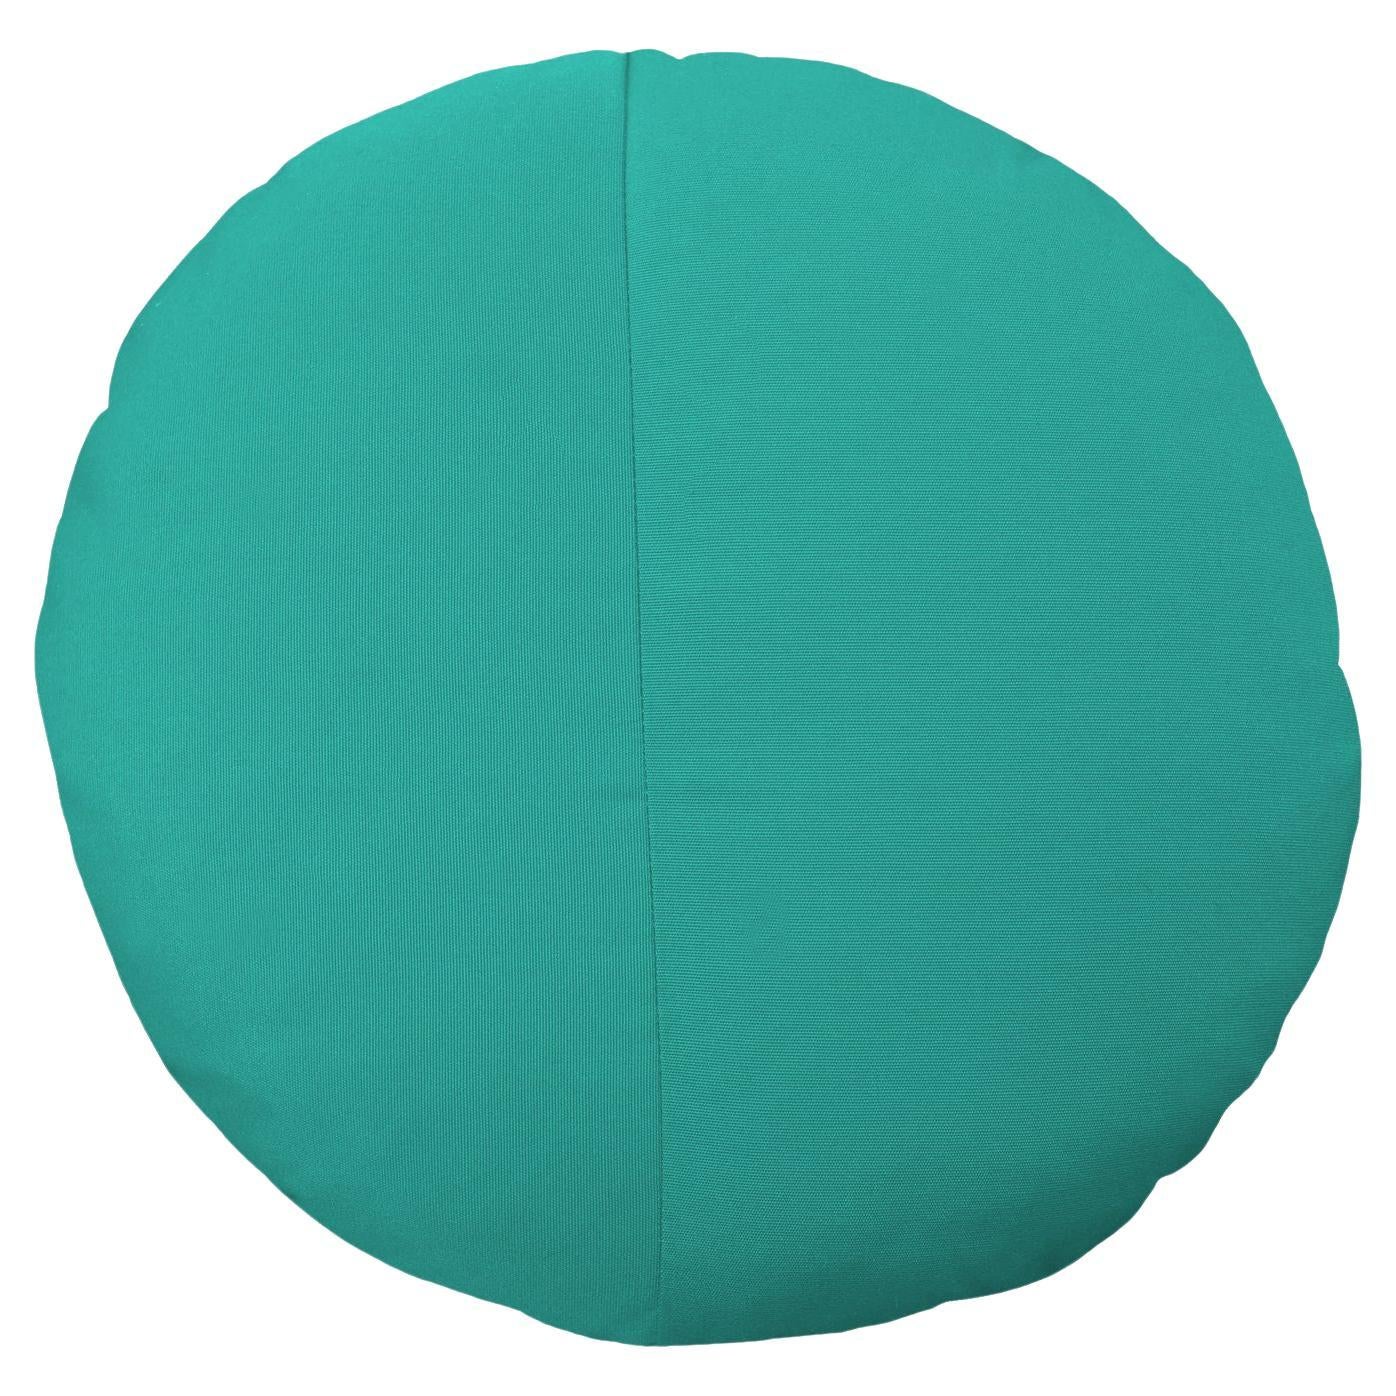 Bend Goods - Round Throw Pillow in Teal Sunbrella For Sale